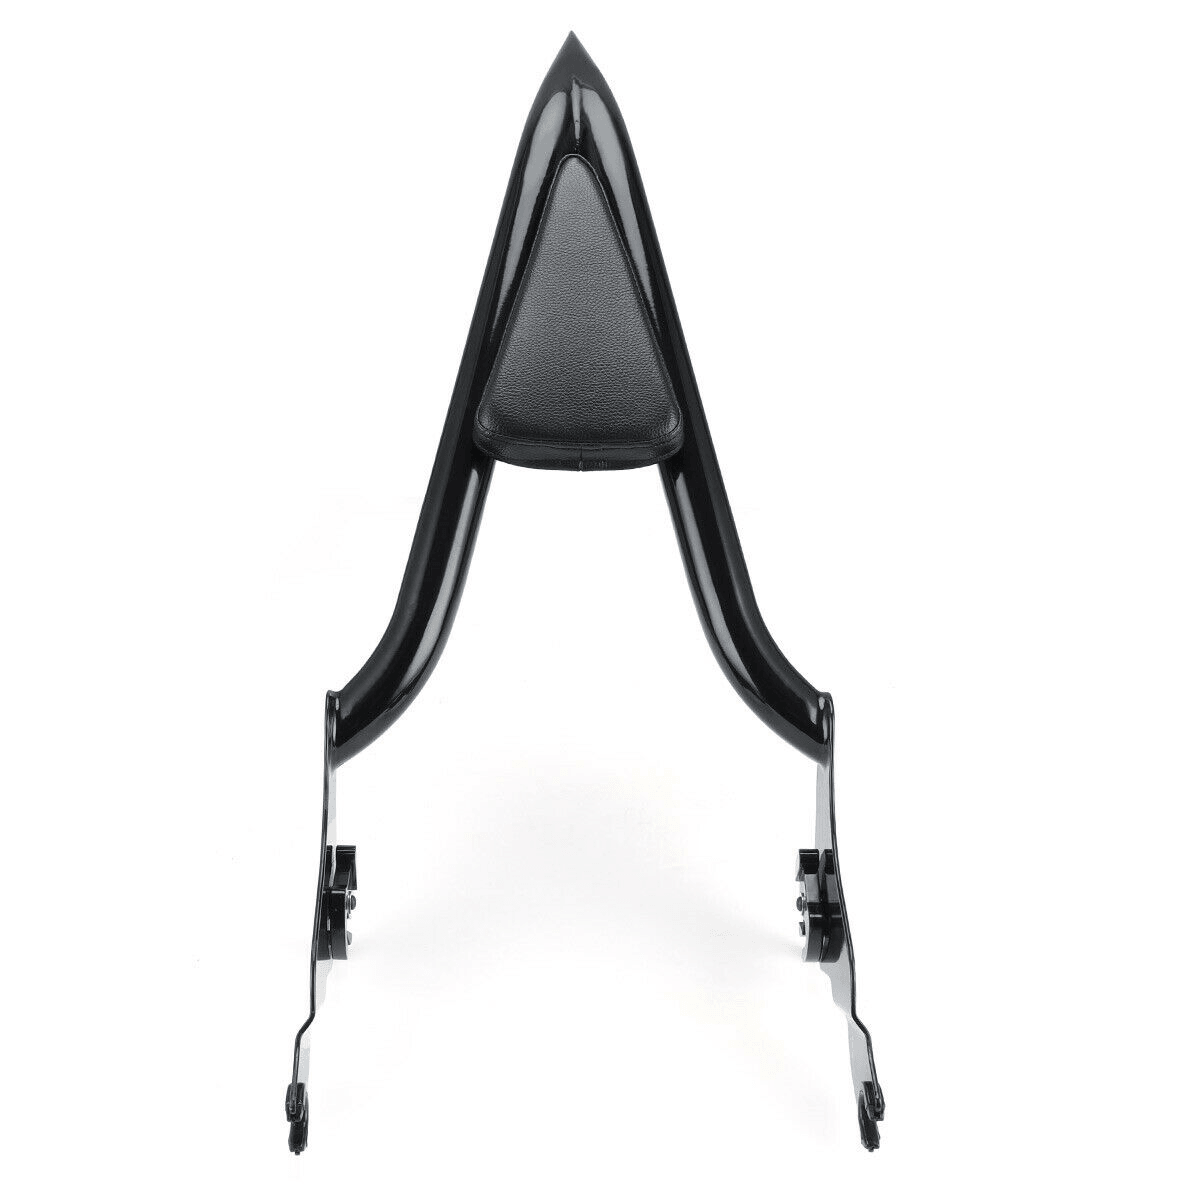 16" Tall Backrest Sissy Bar For Harley CVO Road Glide Street Touring Road King - Moto Life Products